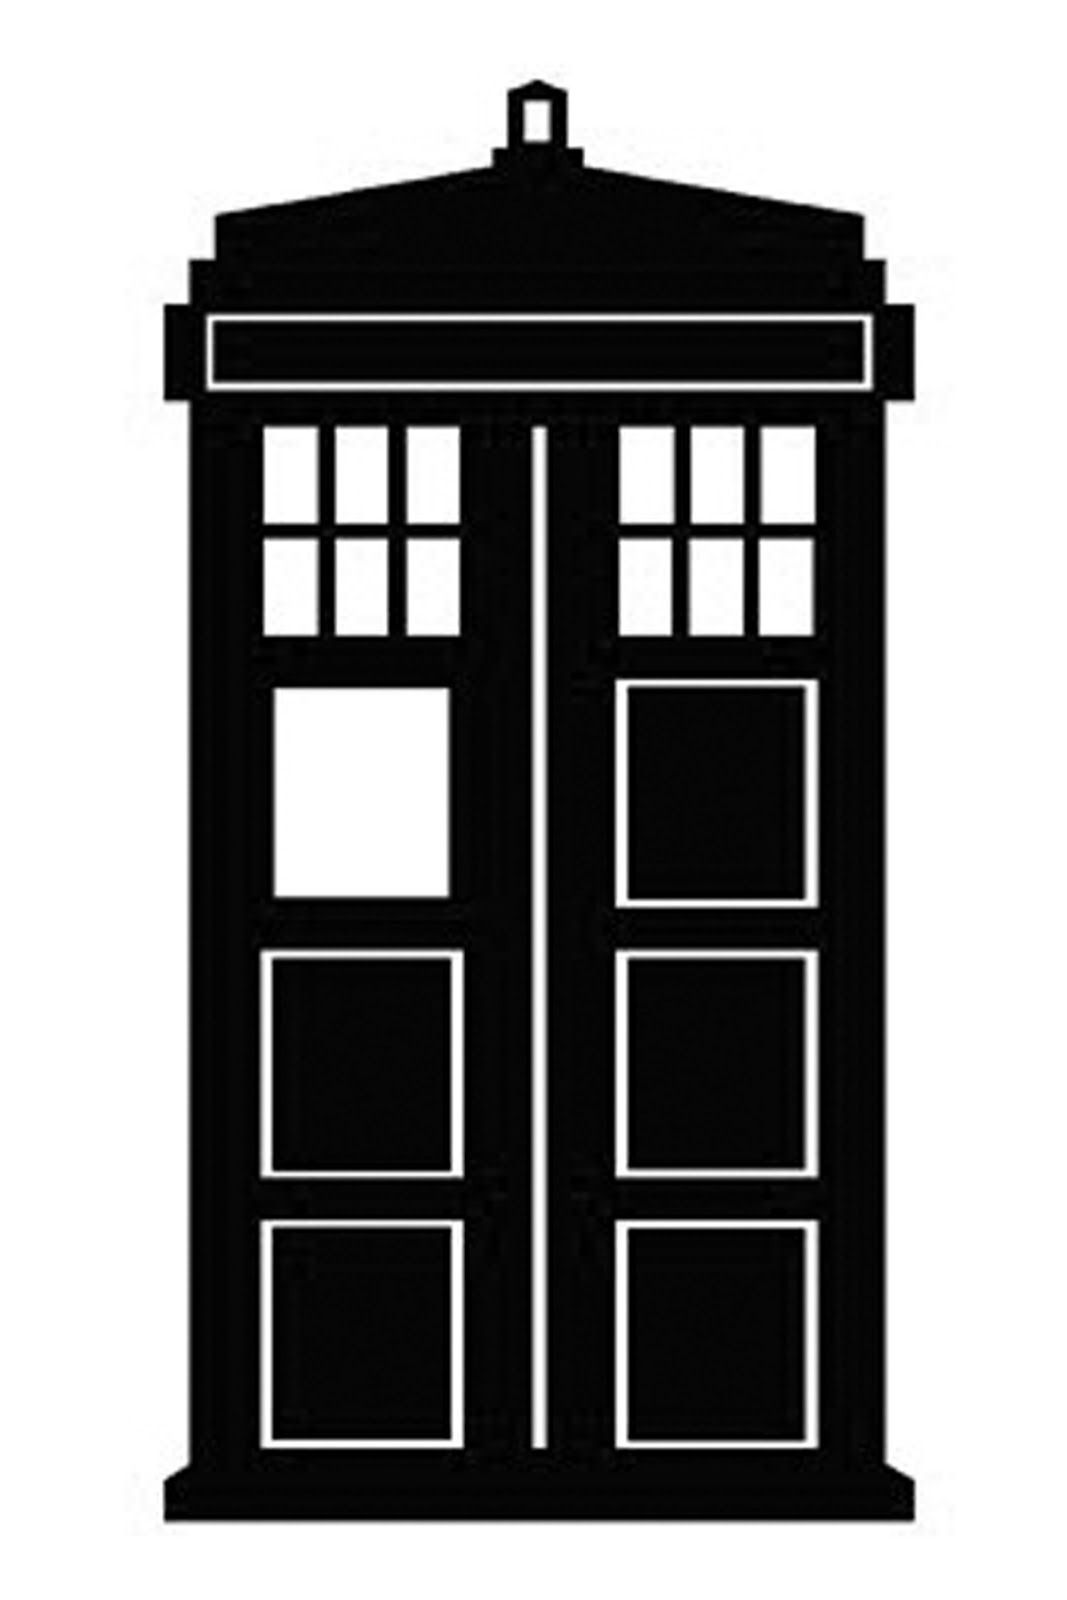 Doctor Who Clipart #1